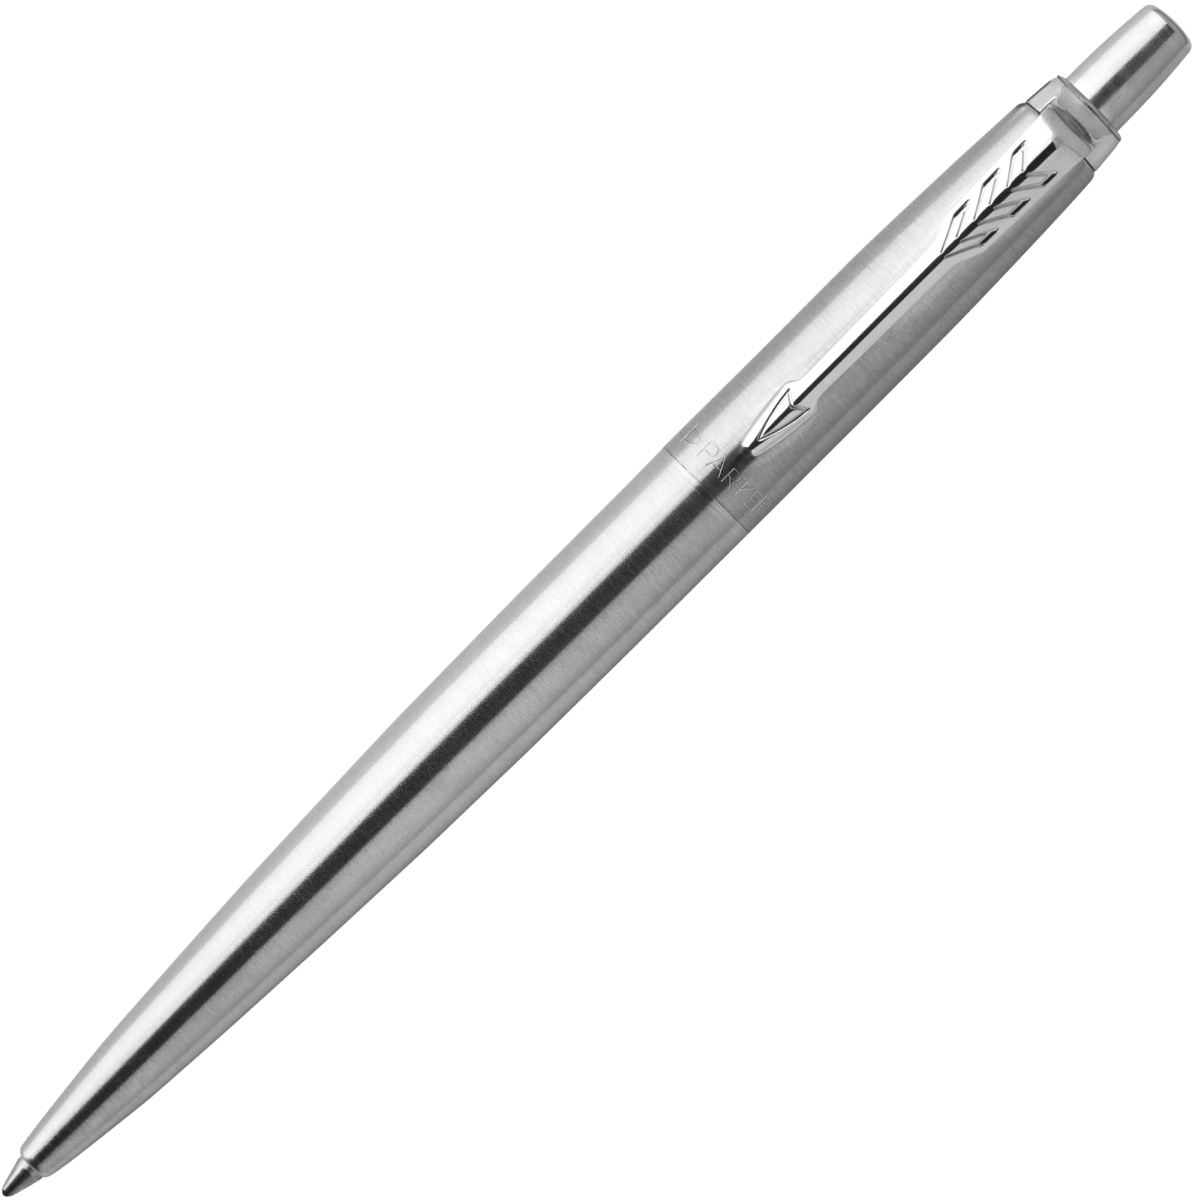  Гелевая ручка Parker Jotter Core K694, Stainless Steel CT